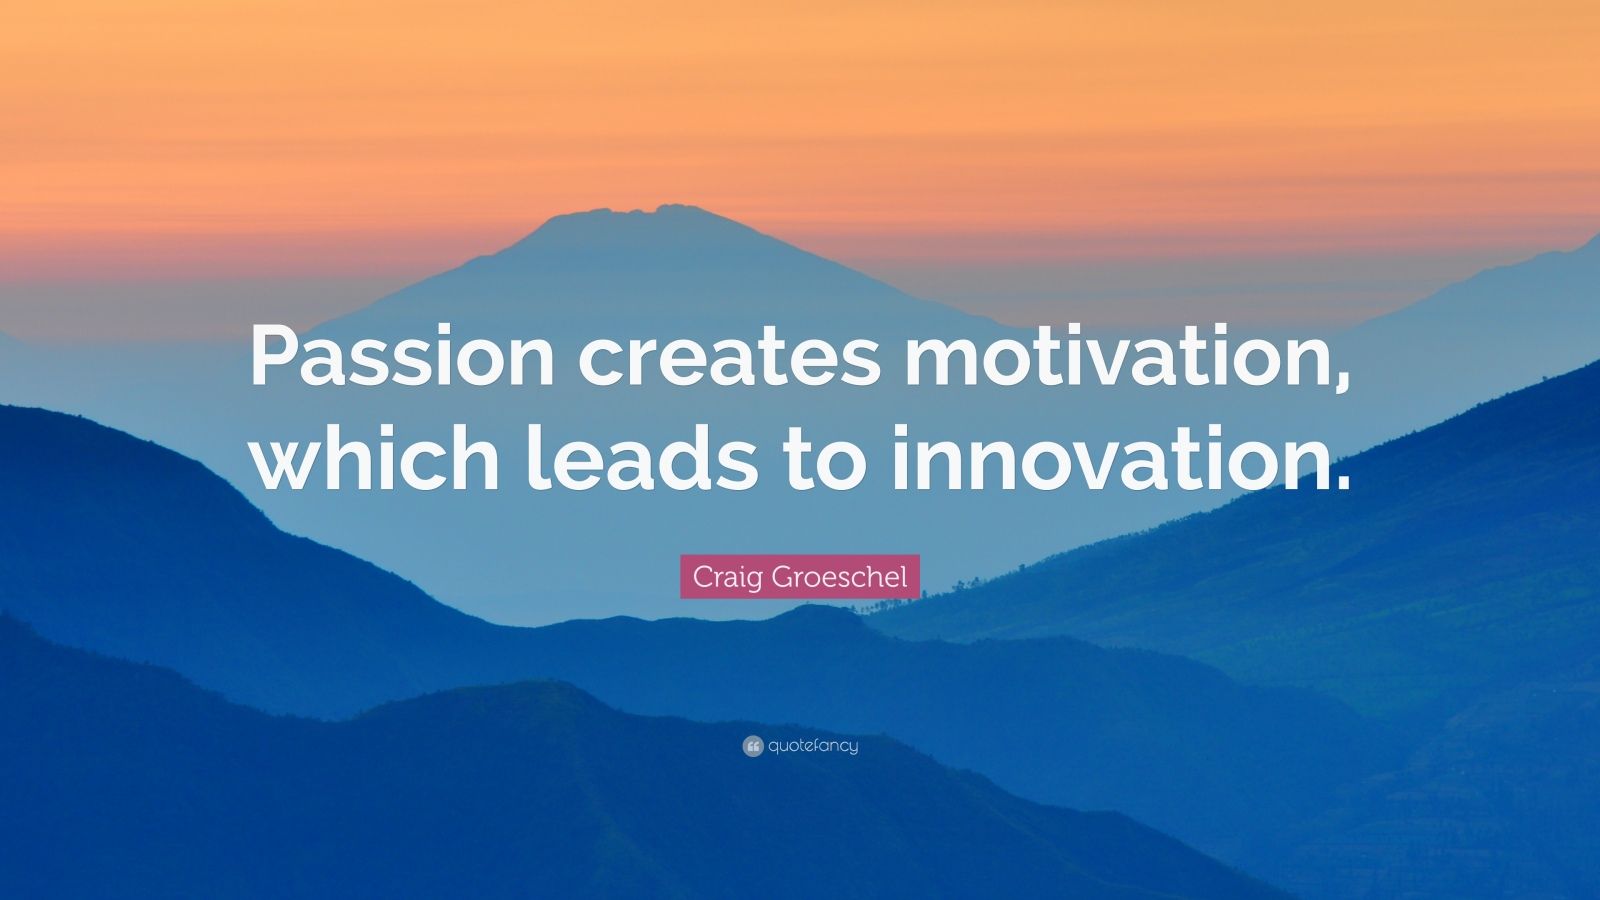 Craig Groeschel Quote: “Passion creates motivation, which leads to